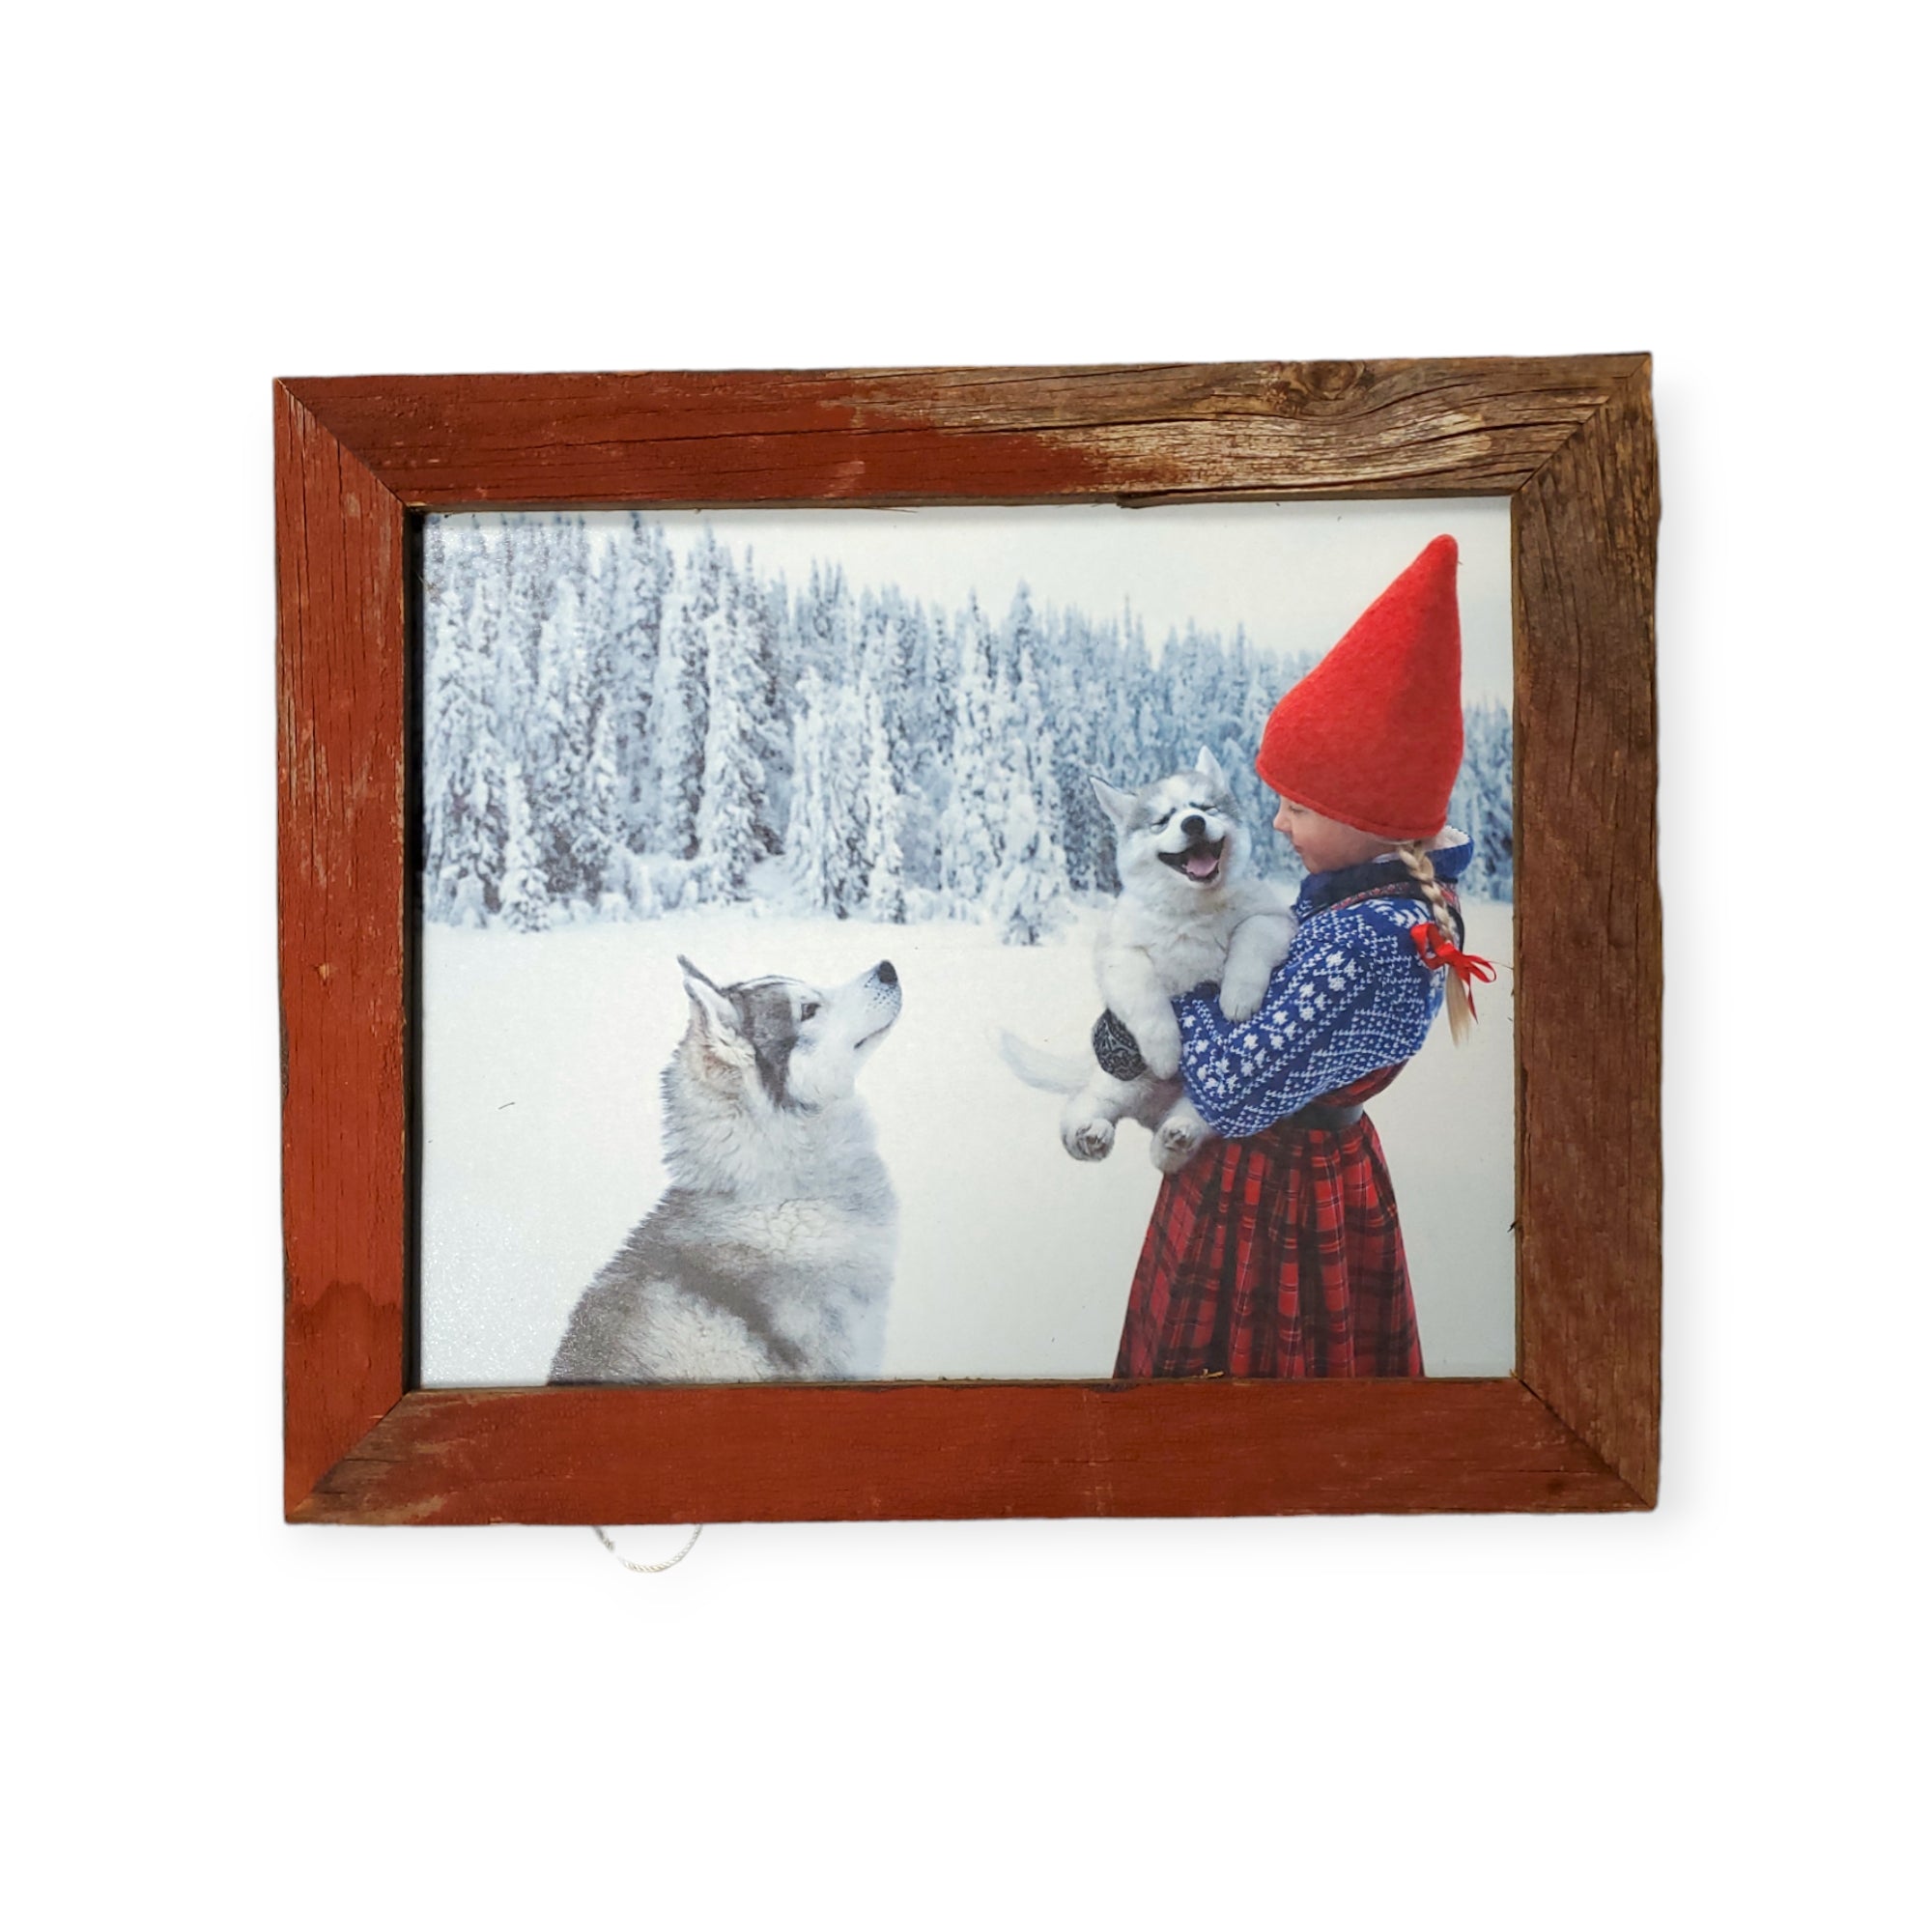 Artwork: Anja with Puppy & Dog - Puppies Wish Book White Frame